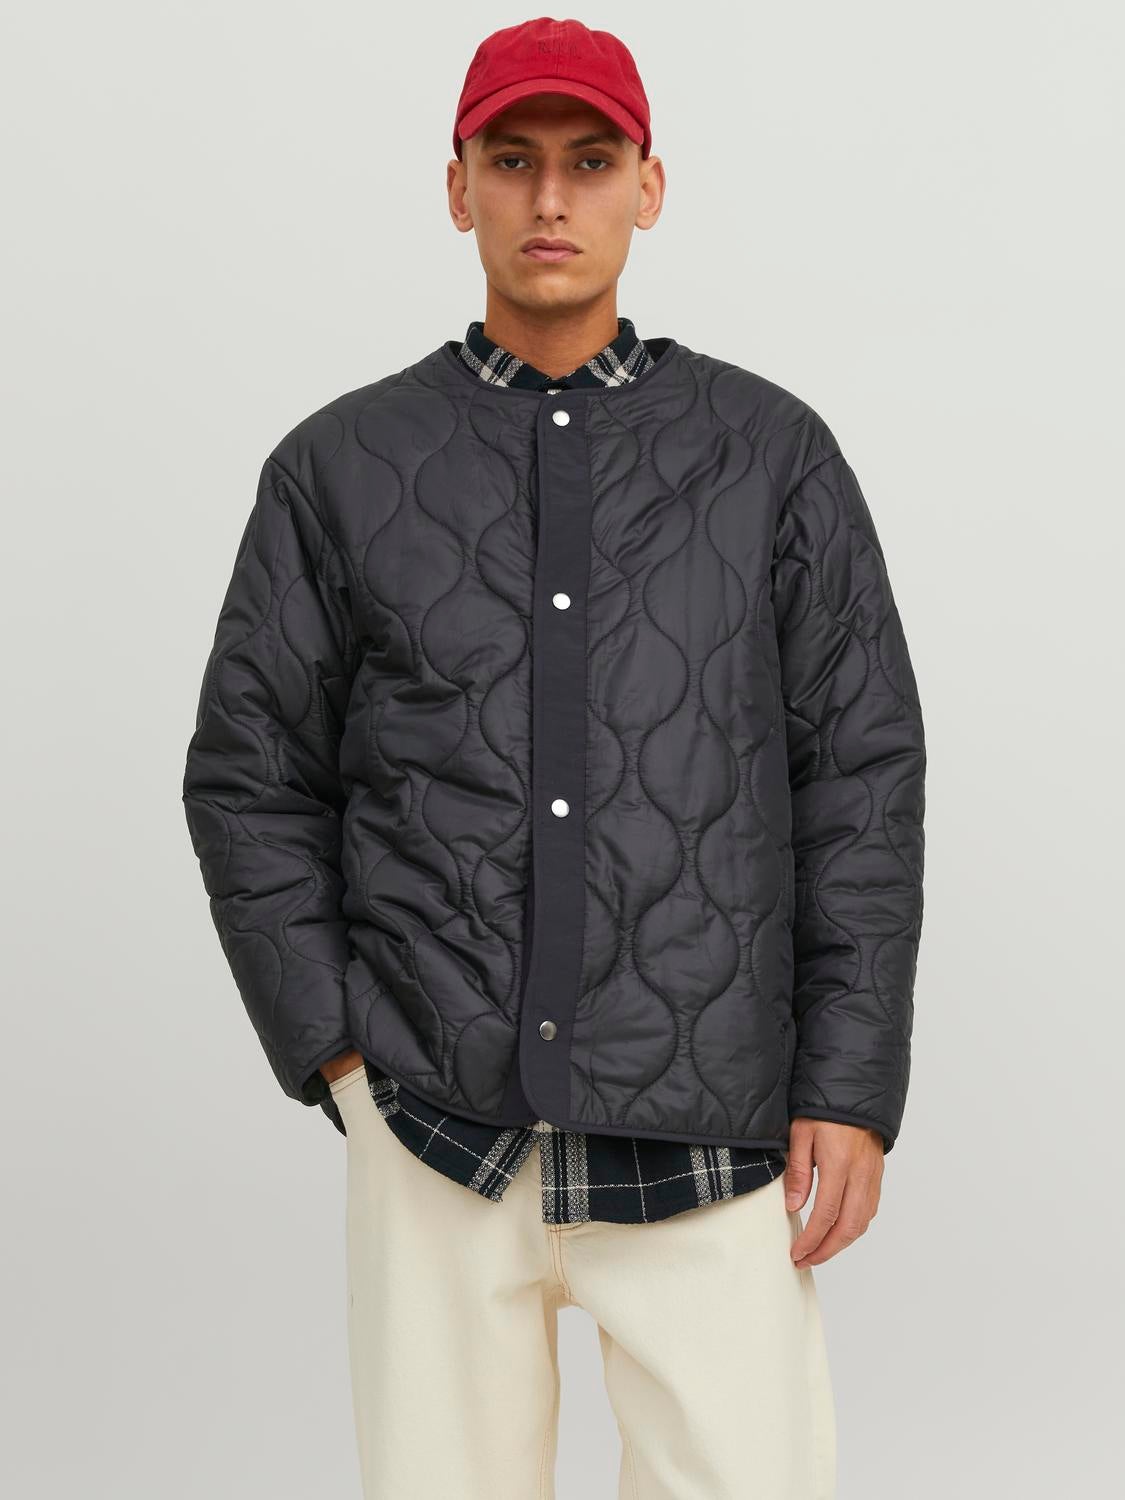 POST O'ALLS 41 DV QUILTED JACKET BLACK購入価格